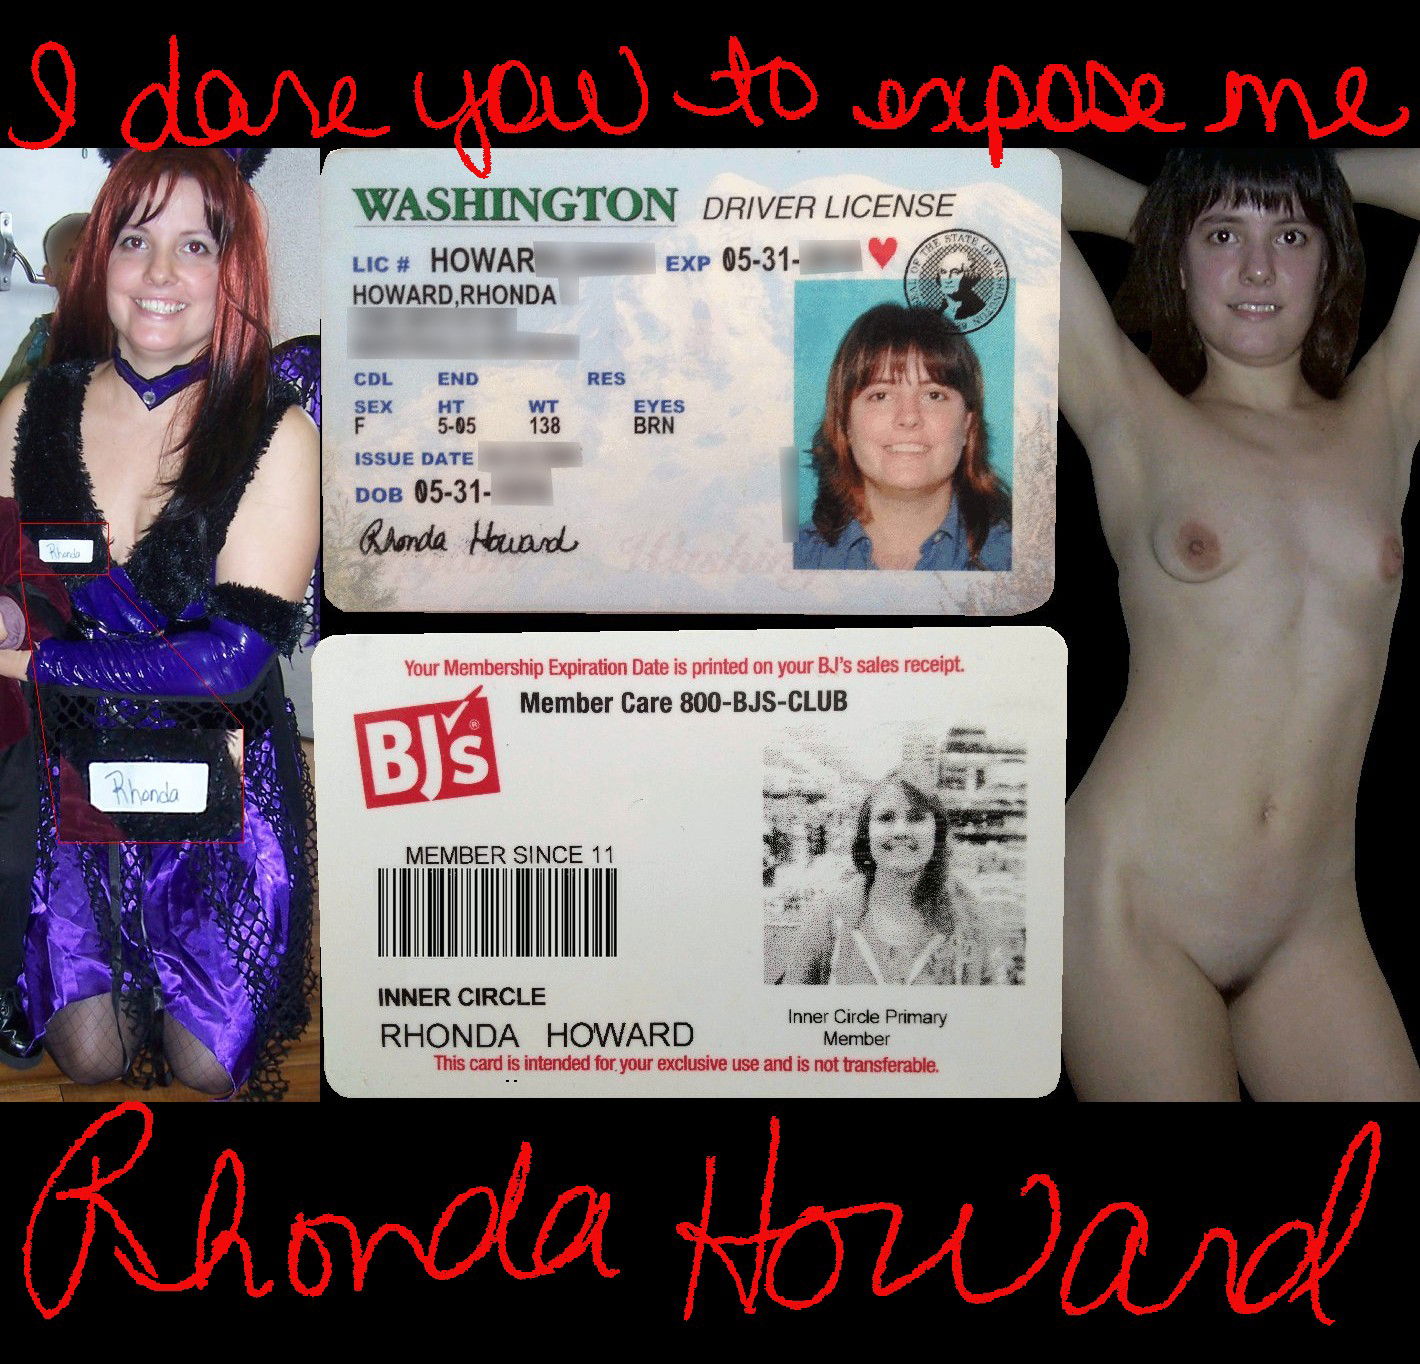 Photo by johndlokcuc with the username @johndlokcuc,  February 6, 2016 at 4:57 AM and the text says 'She’s a hottie.  Let’s make sure that EVERYONE knows how hot her body is under those clothes. #rhonda  #howard  #DL  #slut  #wife  #exposure  #Exposed  #tiny  #tits  #DRESSED  #UNDRESSED  #brunette'